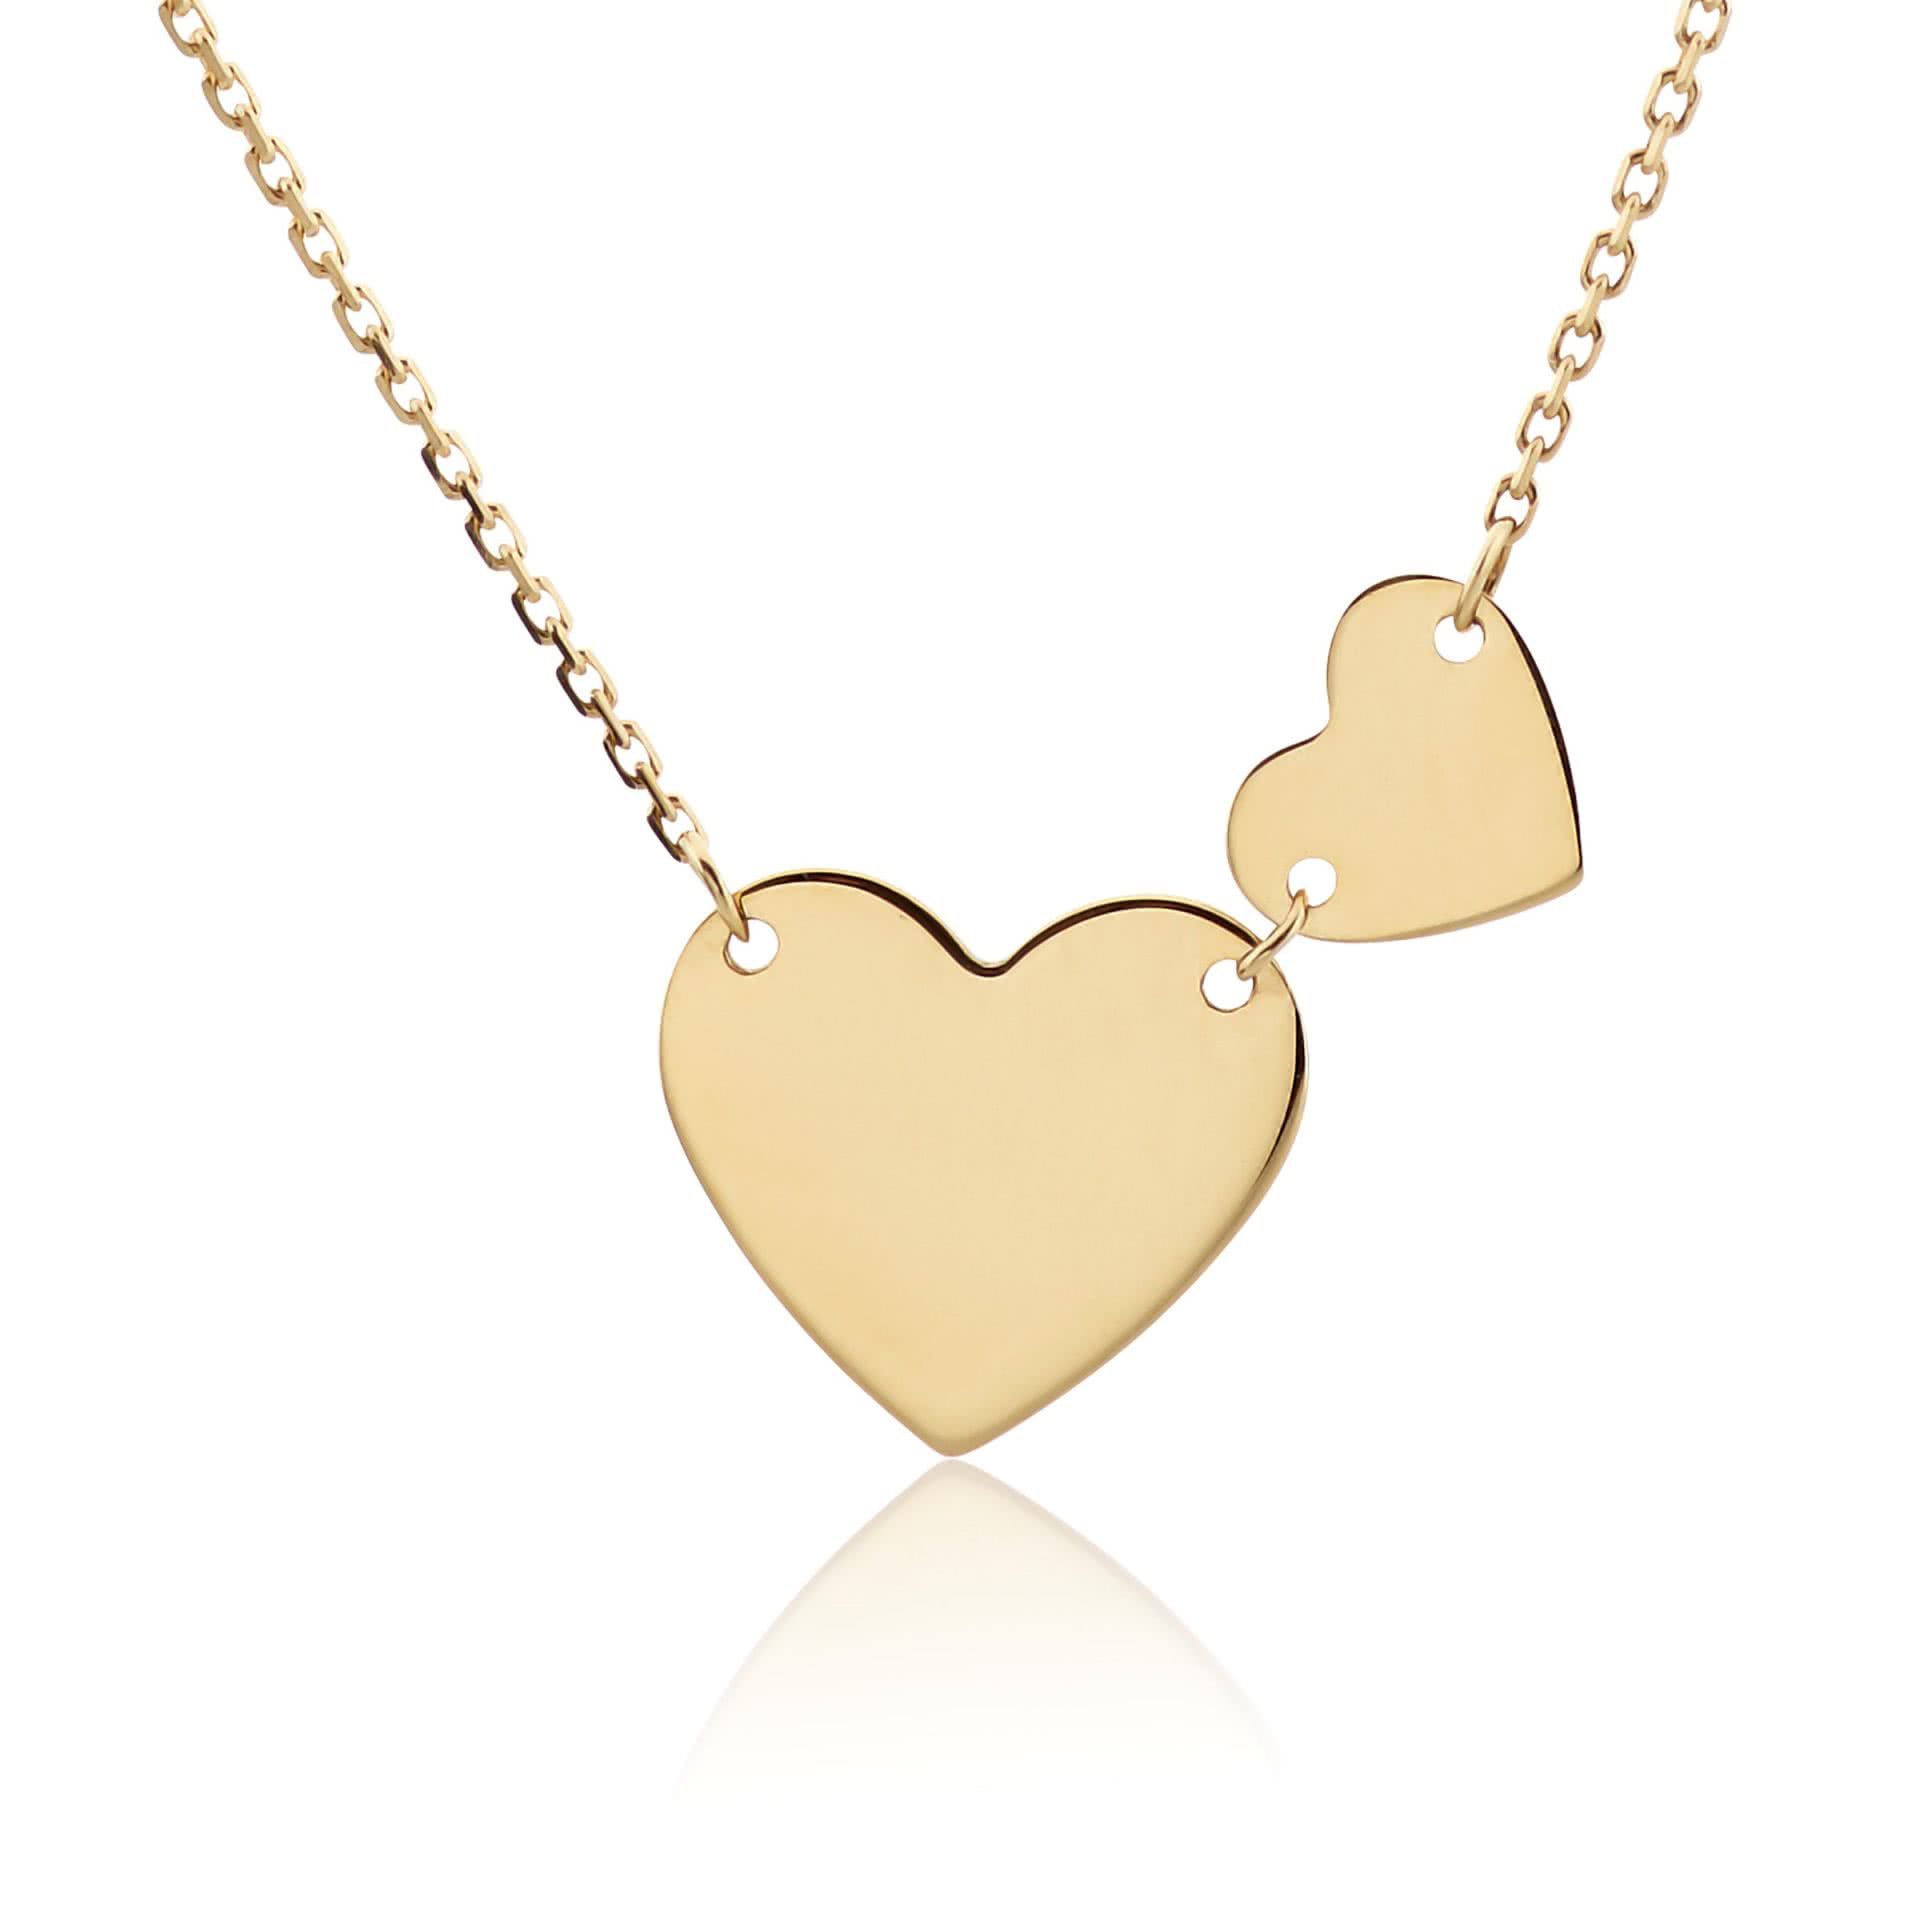 18ct yellow gold 2 hearts charm necklace | Cerrone